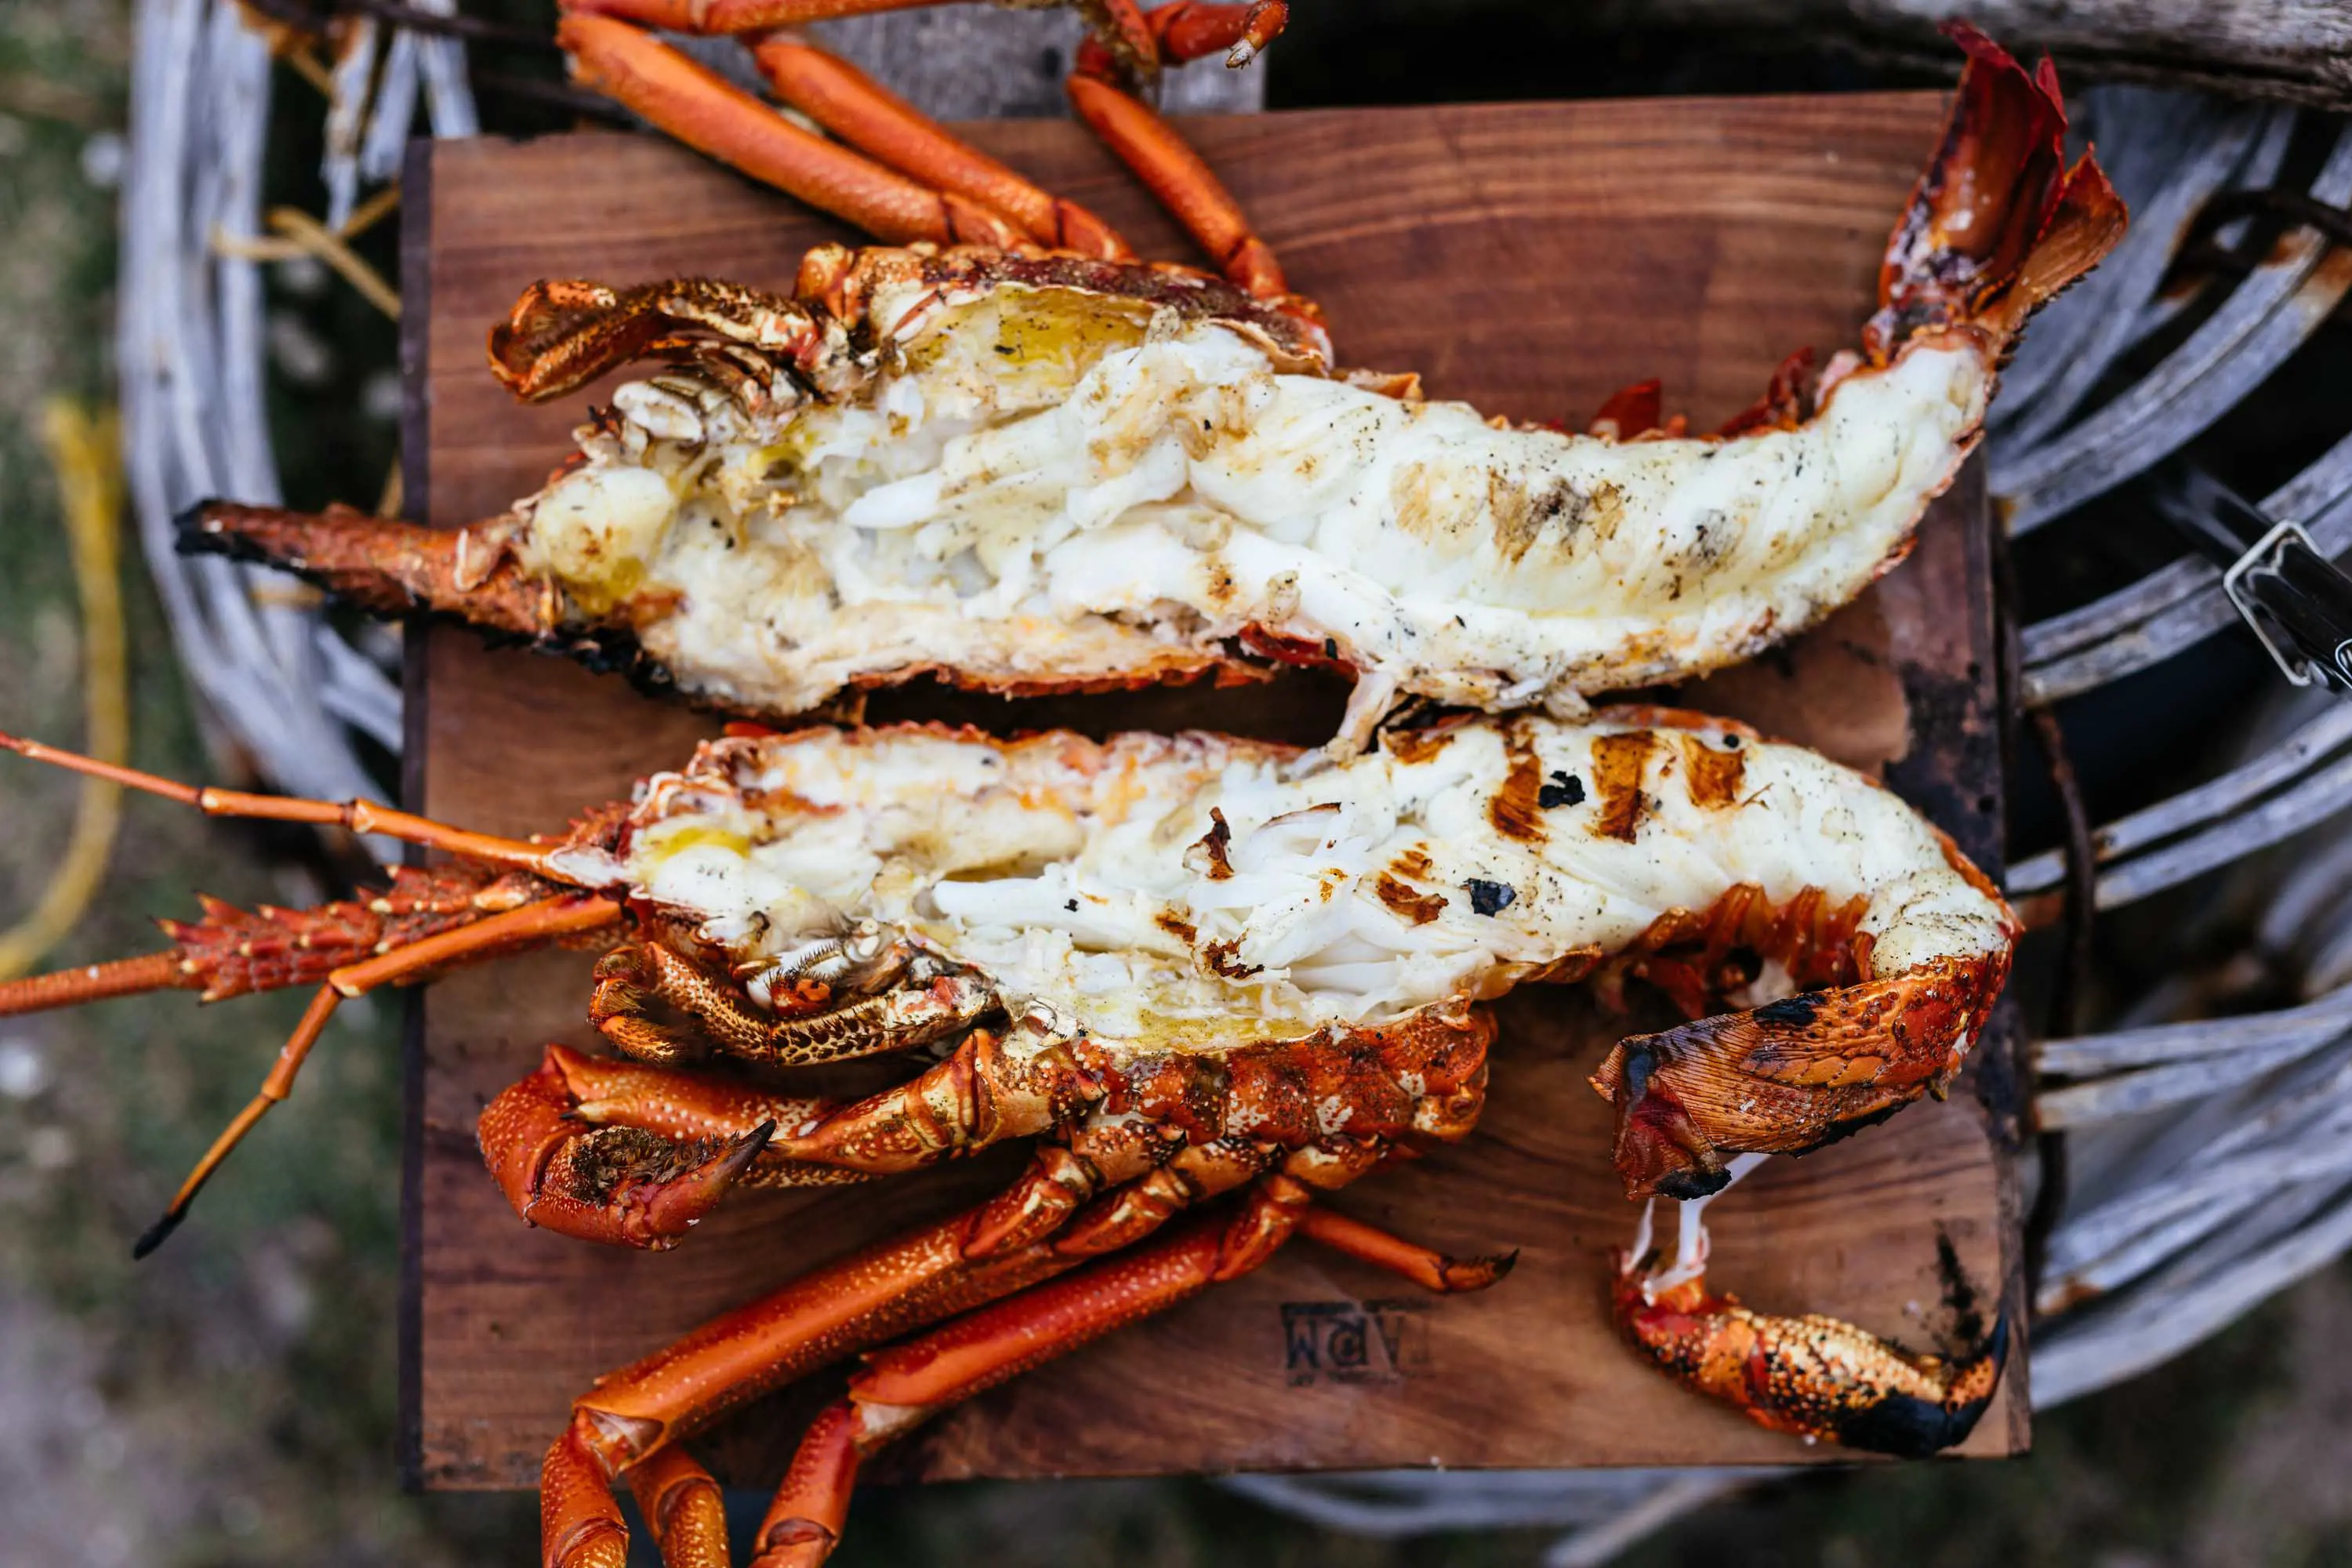 A large cooked crayfish, cut in half length-wise is displayed on a wooden board.  